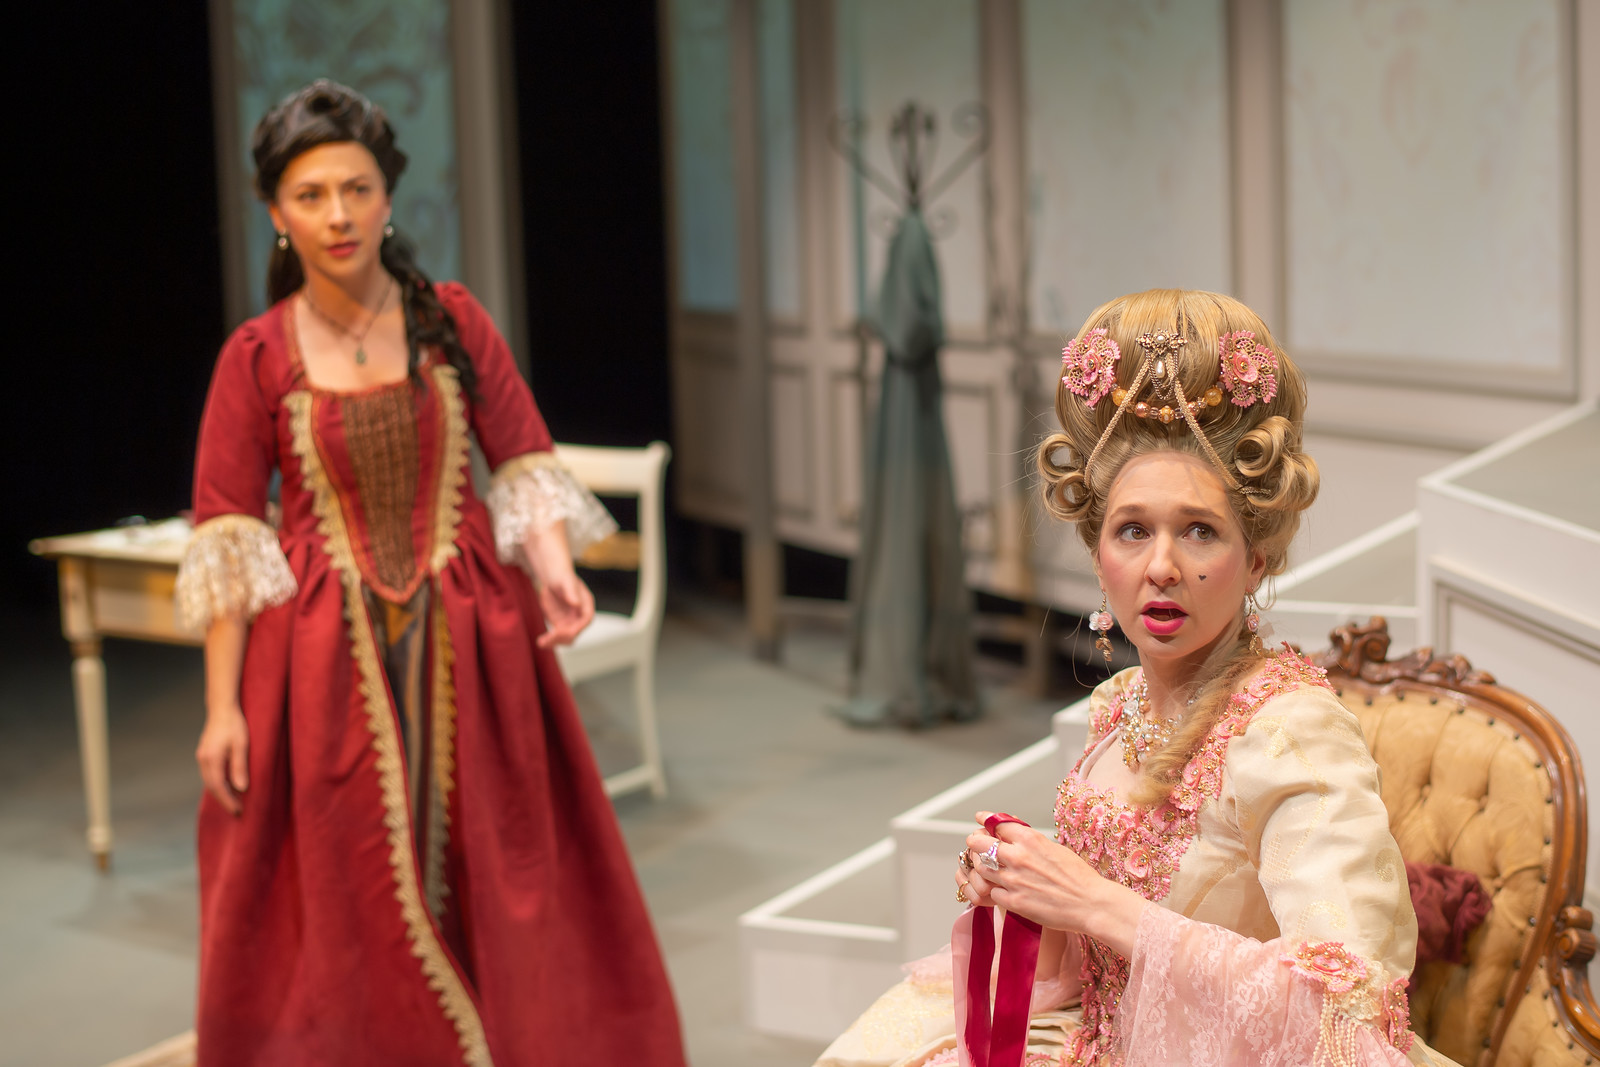 Angela DiMarco as Olympe de Gouges and Shanna Allman as Marie Antoinette. Photo Credit: Truman Buffett Photography